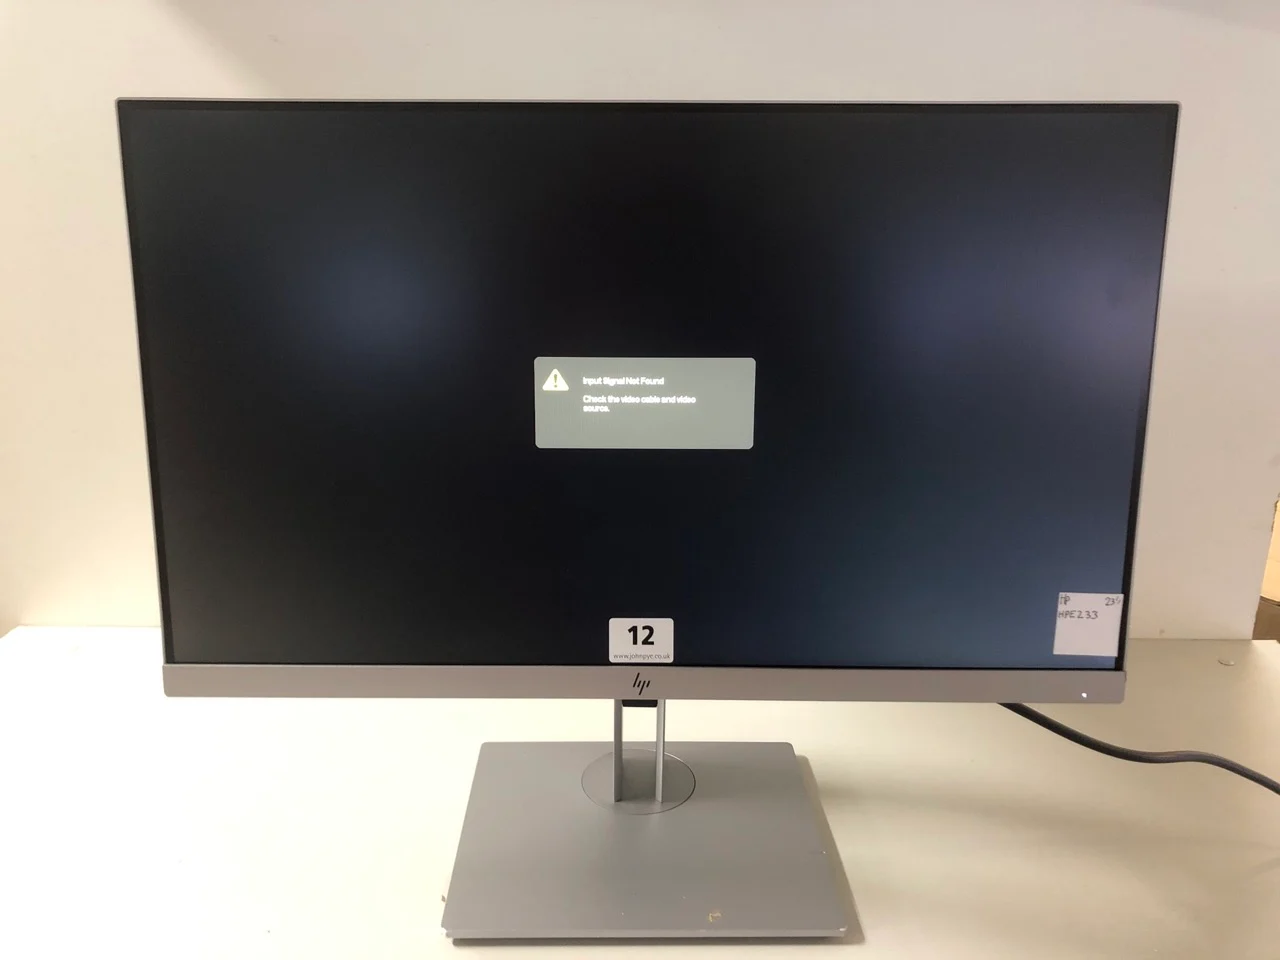 Hp Inch 23 Flameless  Monitor Model Hpe233 With Hdmi ,Dp And Vga Full Hd